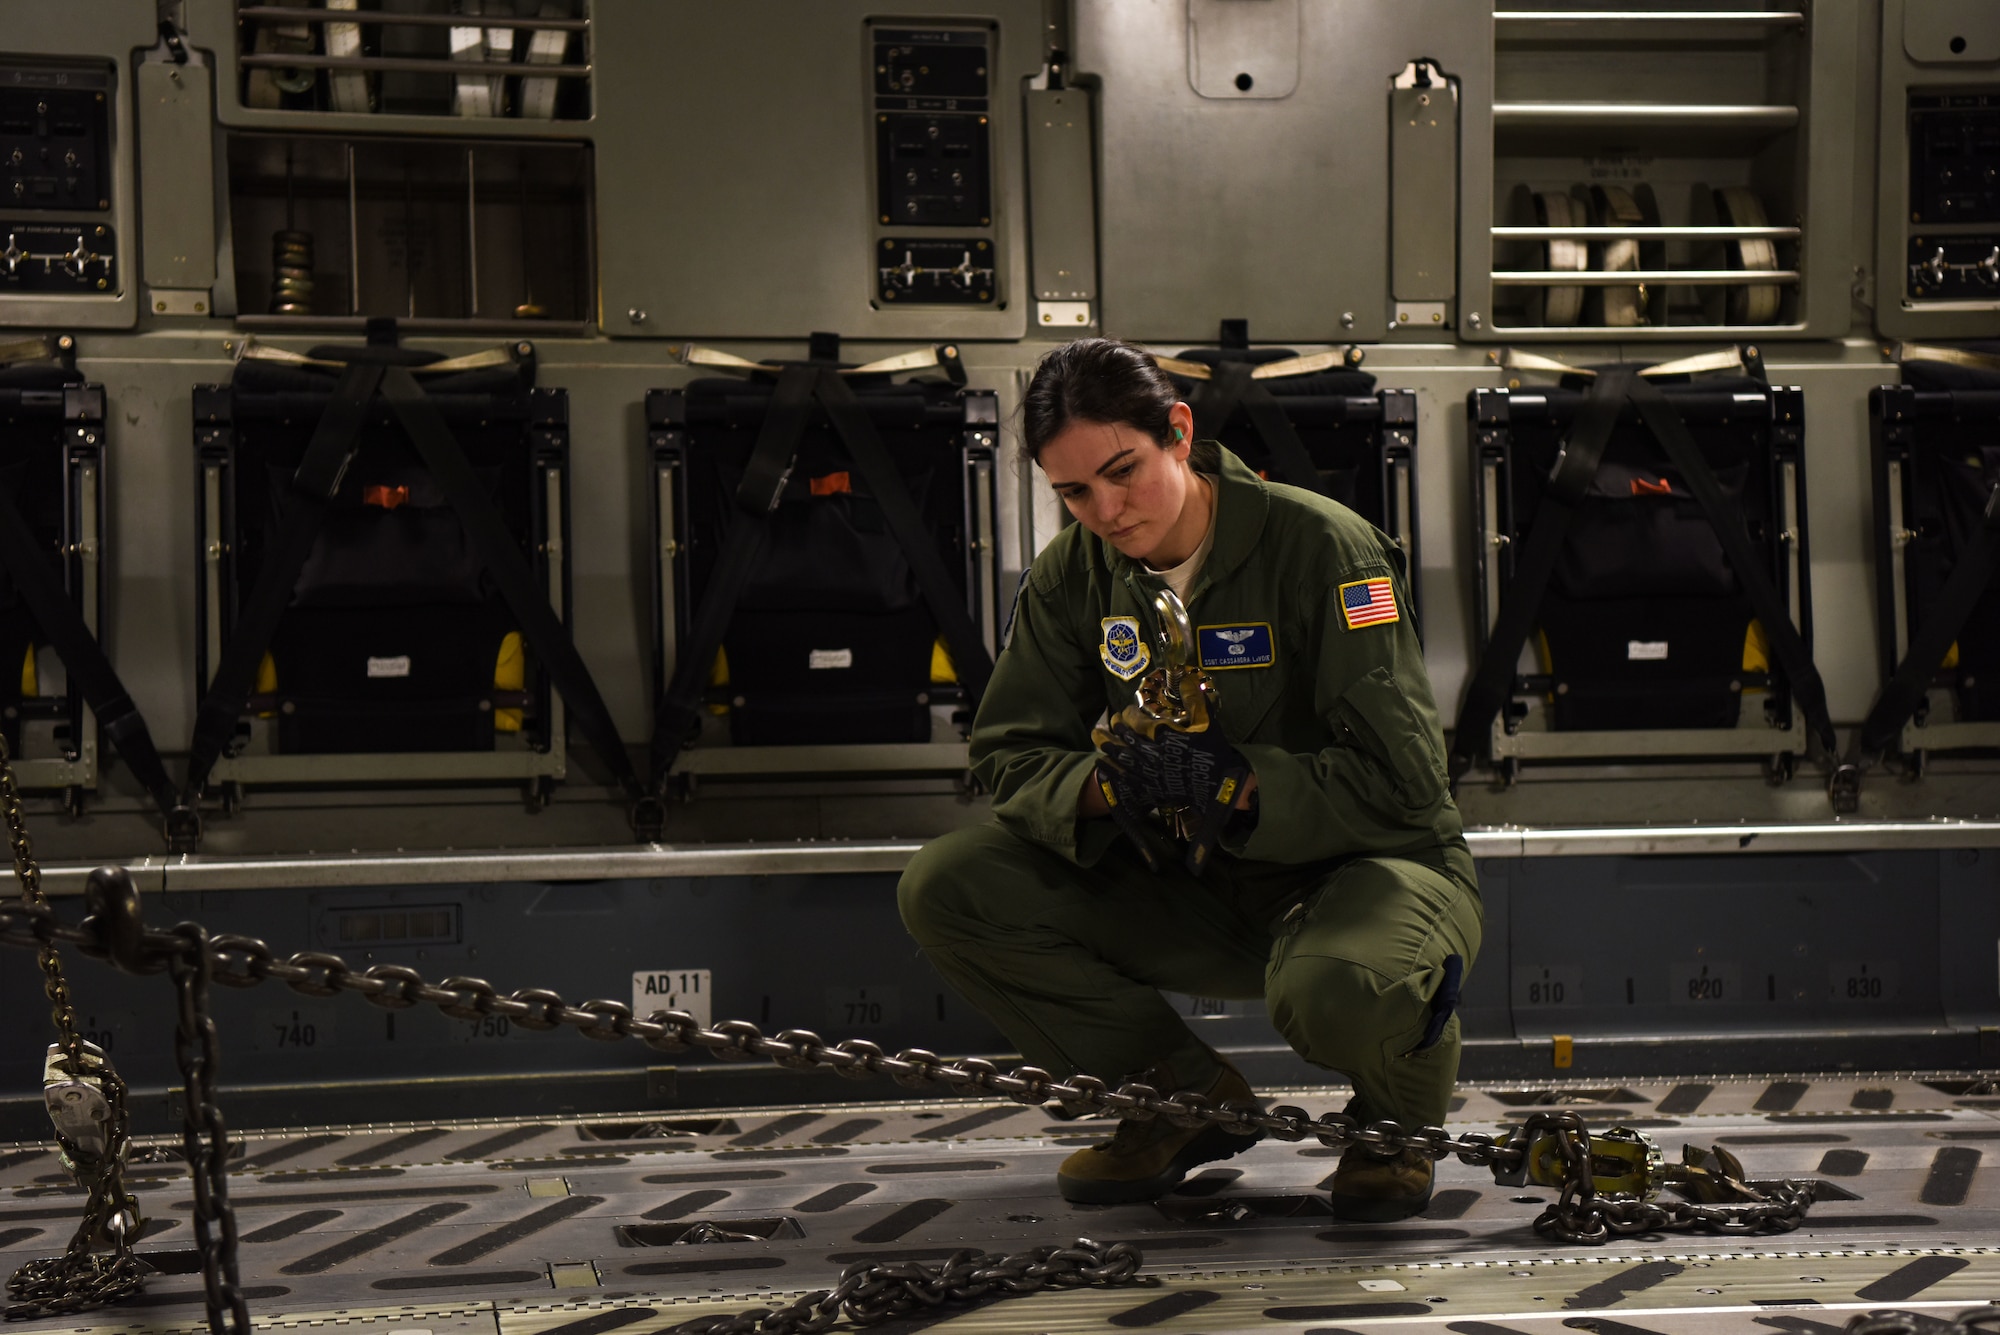 Staff Sgt. Cassandra LaVoie, 3rd Airlift Squadron loadmaster, checks the movement restricting chains aboard a C-17 Globemaster III before flight March 5, 2018, at Dover Air Force Base, Del. LaVoie was a member of an all-female C-17 crew that flew a local mission in honor of Women’s History Month. (U.S. Air Force Photo by Airman 1st Class Zoe M. Wockenfuss)